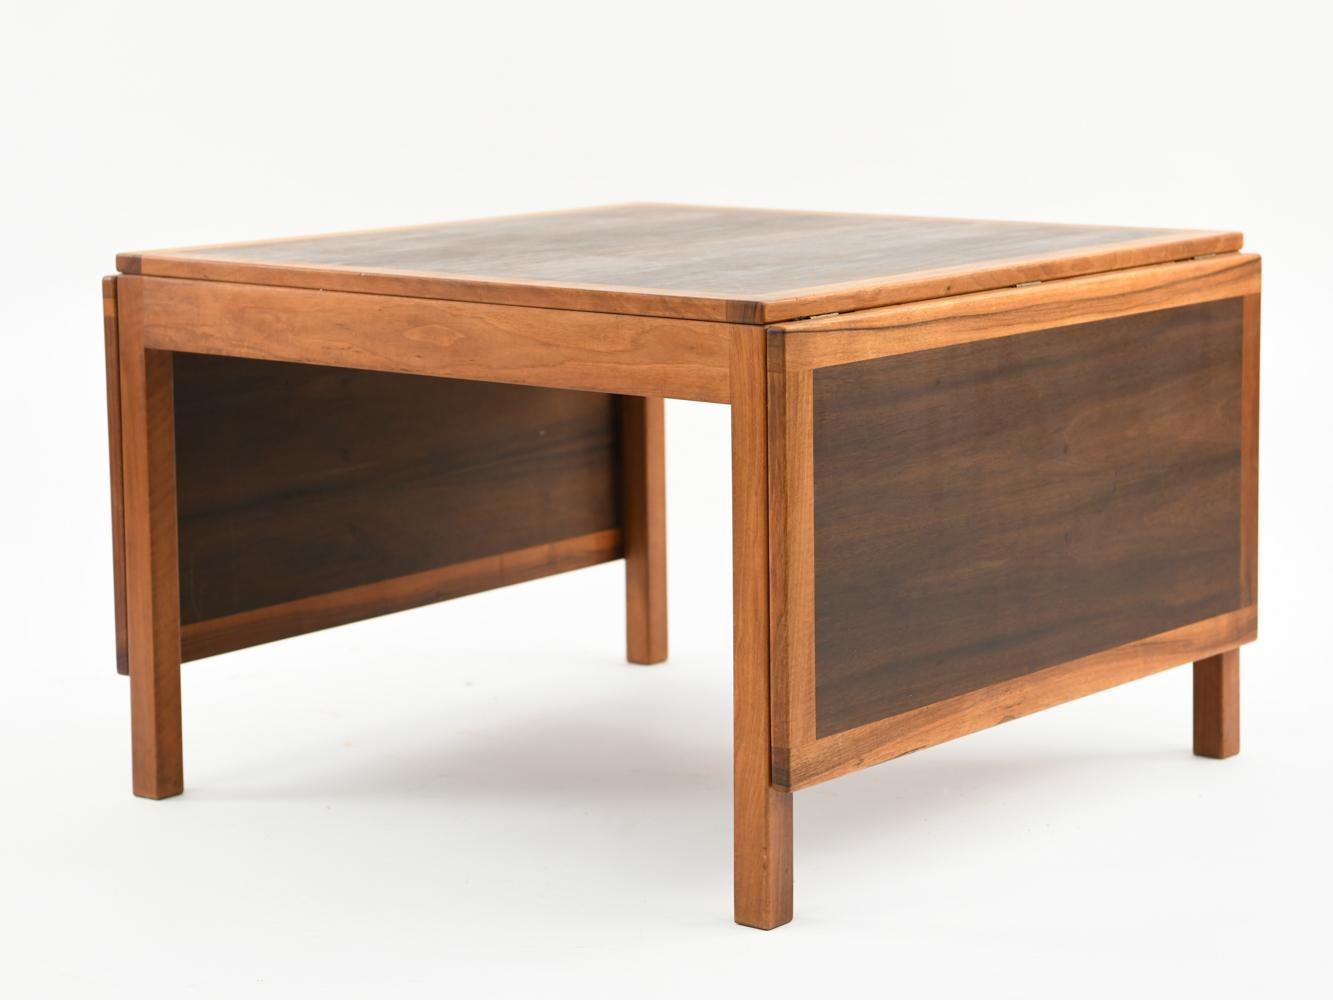 A Danish midcentury coffee table designed by Børge Mogensen for Fredericia in the 1960s. This table is model 5362/574 and cleverly features two drop leaves that allow the table to expand or contract depending on available interior space.